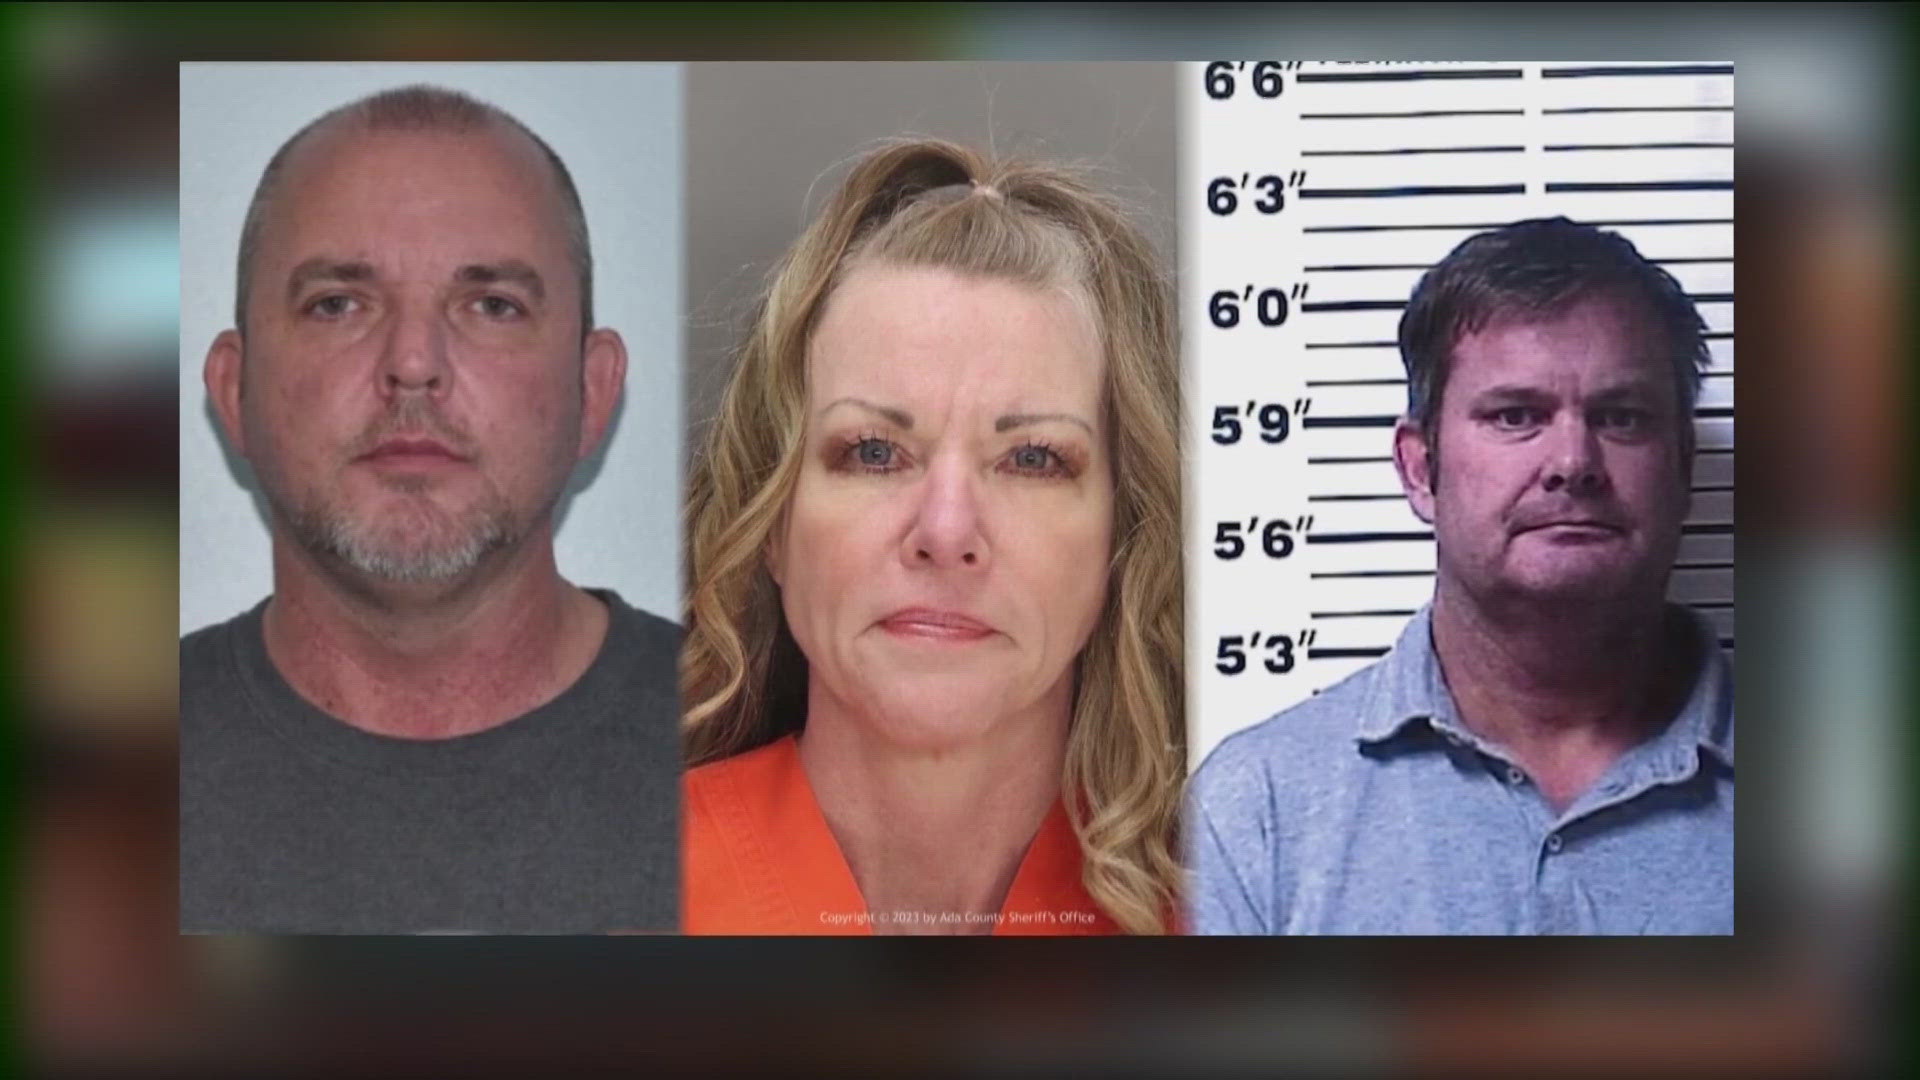 Chad Daybell is accused of murder in the deaths of his wife Lori Vallow's children, JJ Vallow and Tylee Ryan, as well as the death of his first wife Tammy Daybell.